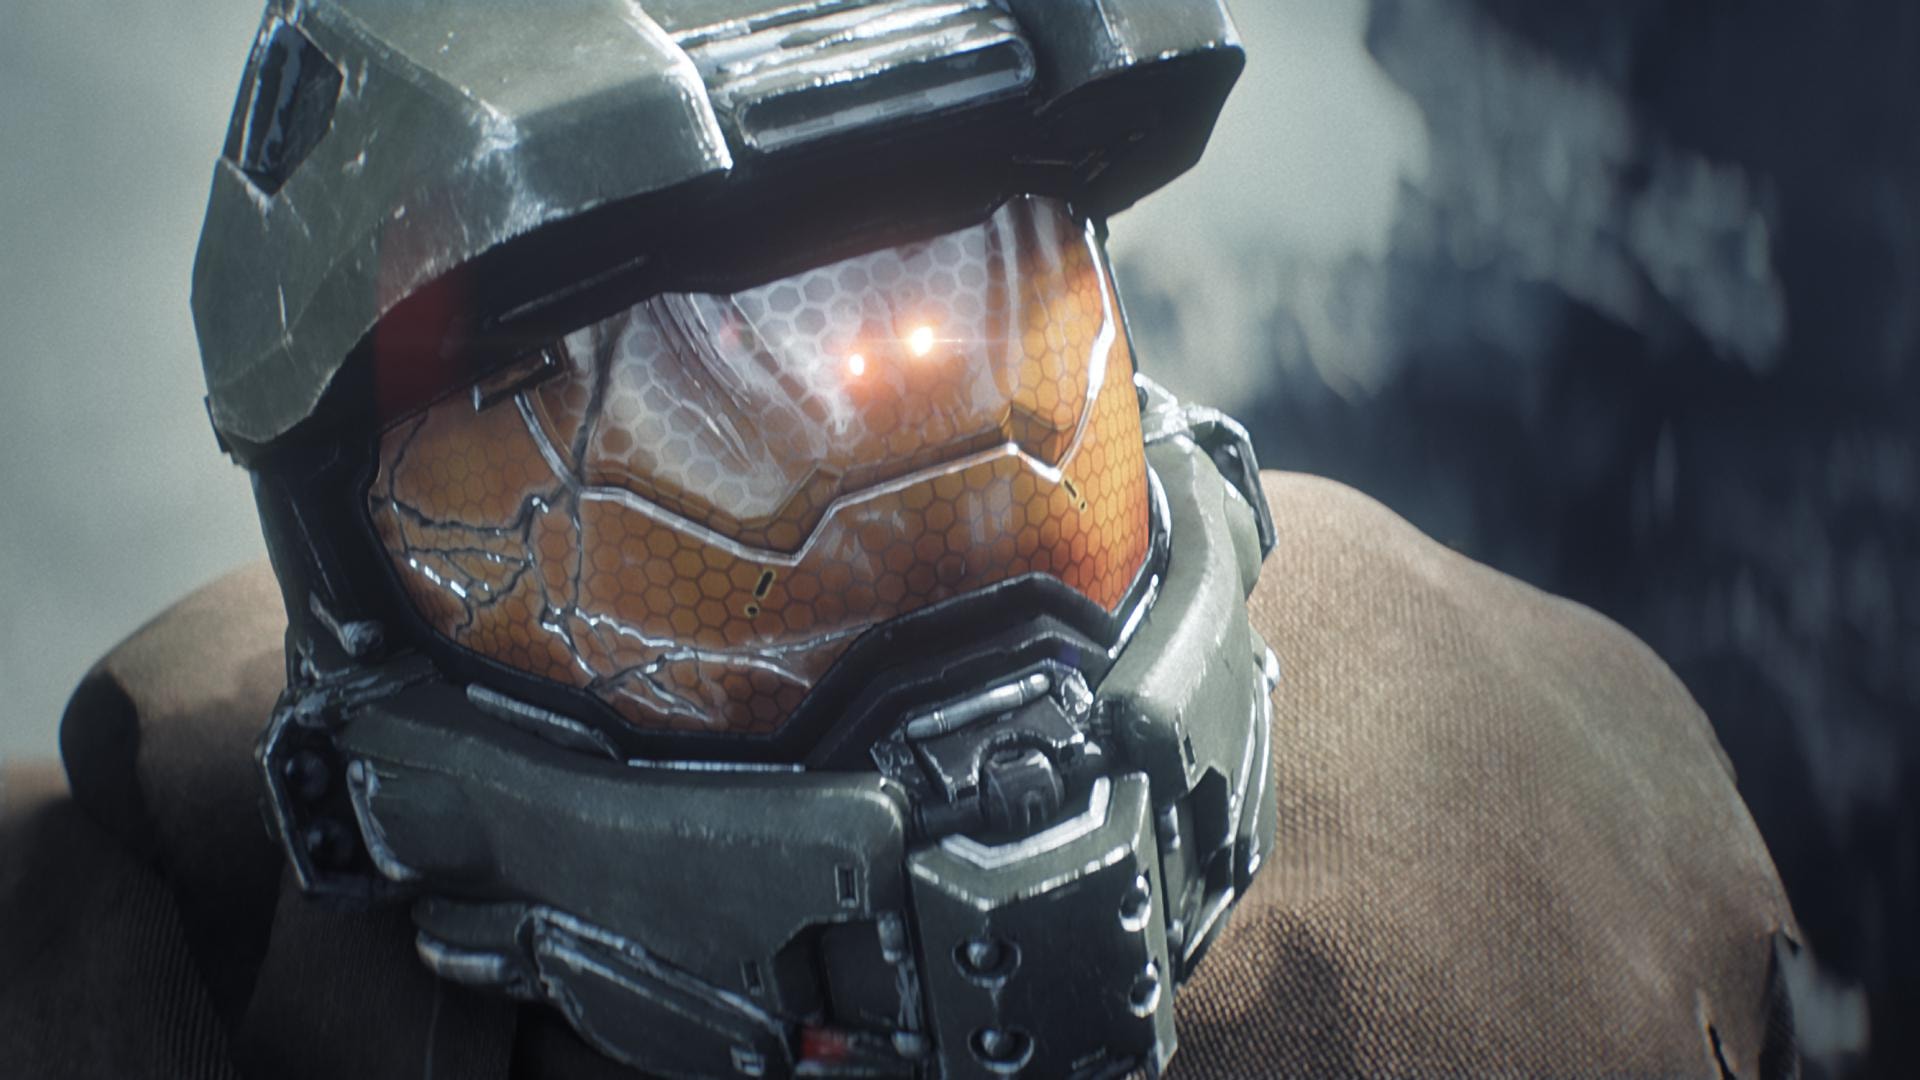 halo-5-is-not-coming-to-pc-343-confirms-after-nvidia-leak